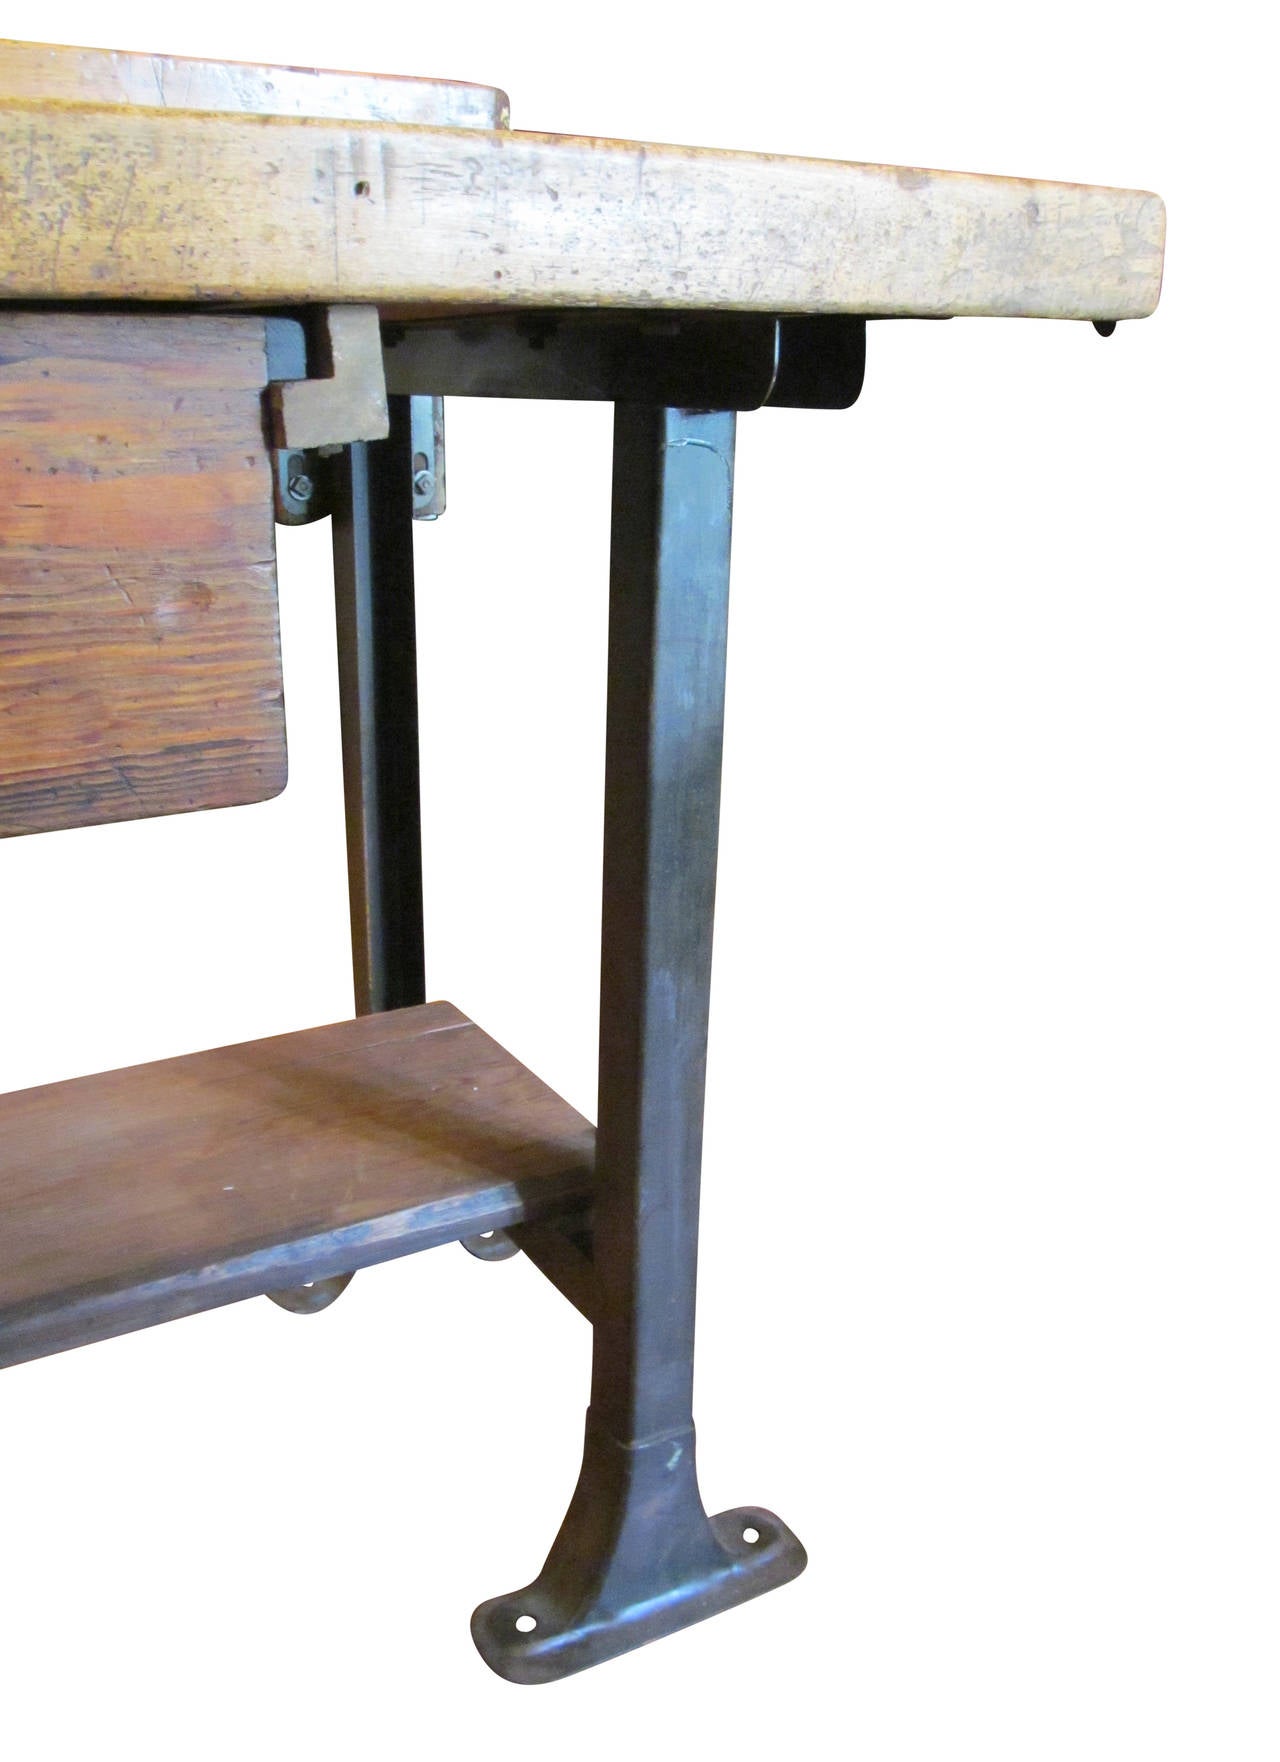 19th Century Late 1800s Industrial Work Bench with Original Hardware and Backsplash